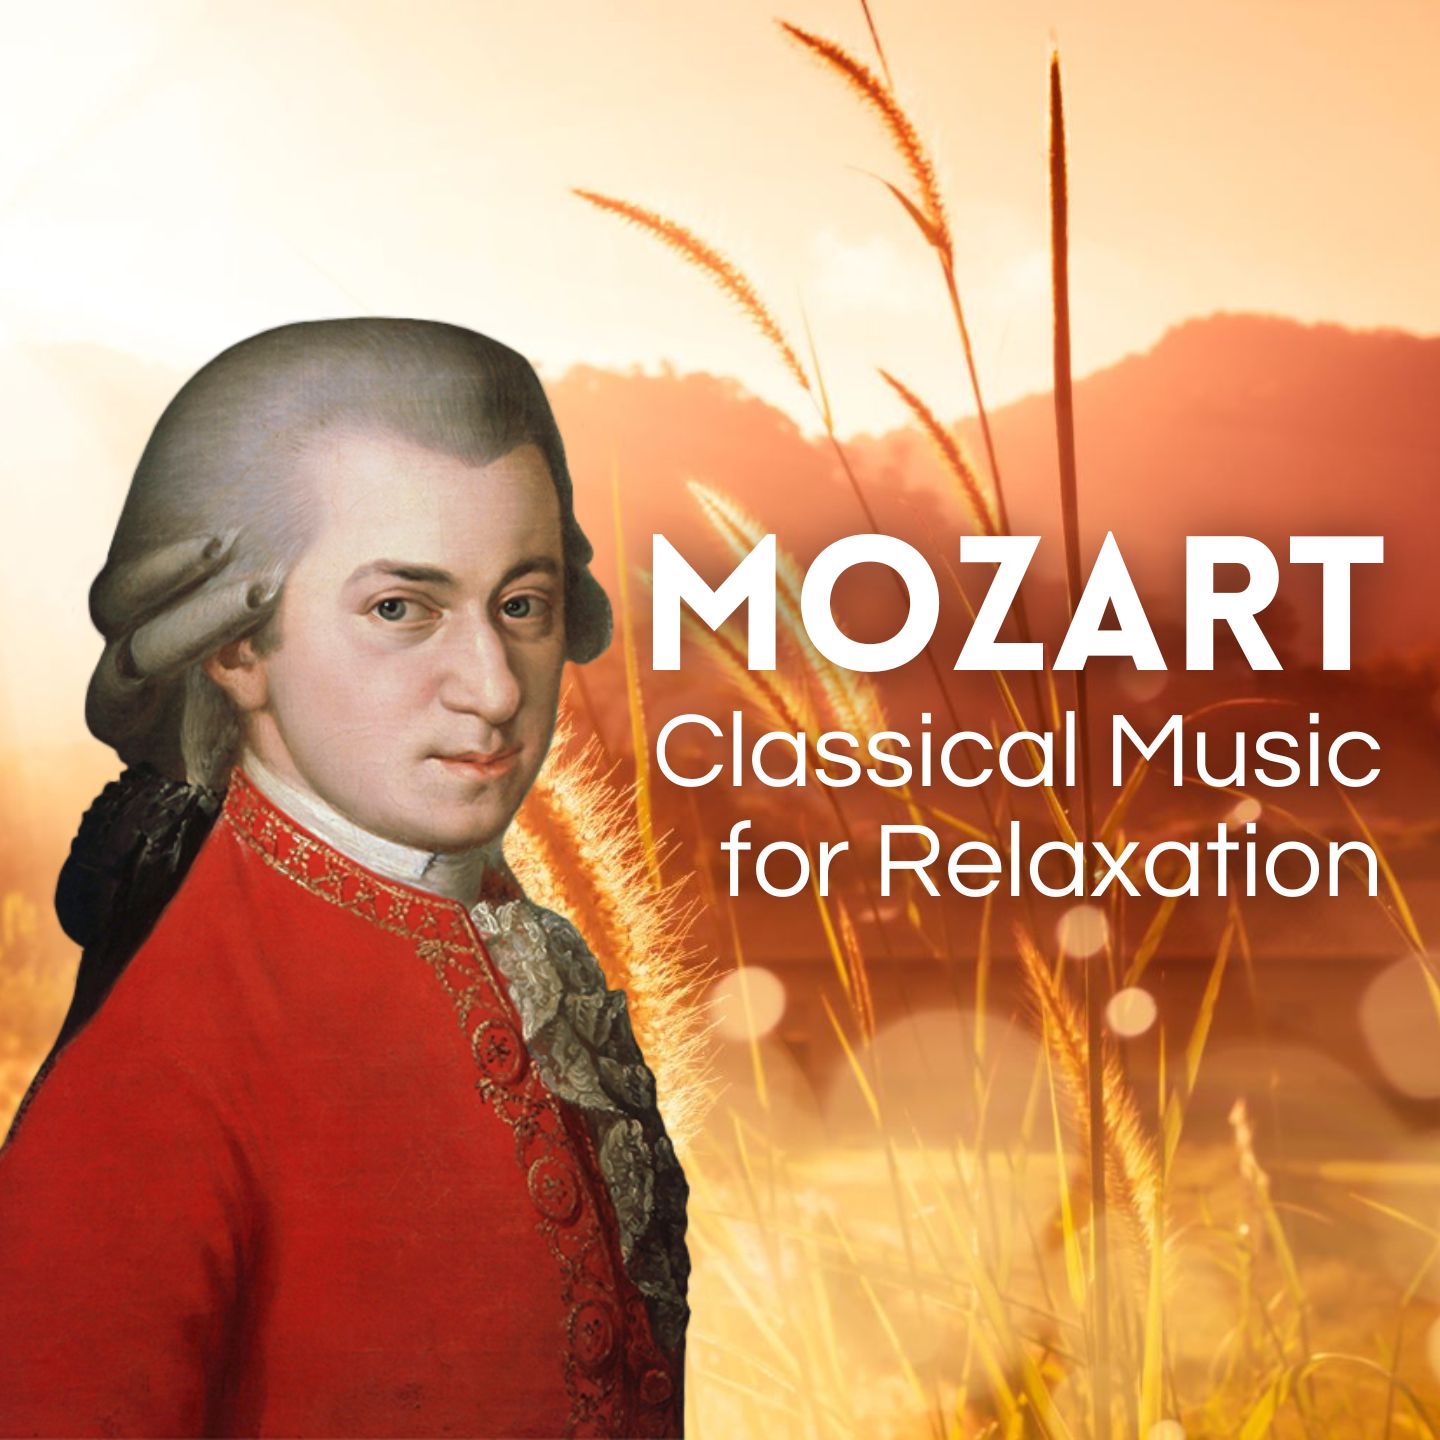 Mozart: Classical Music for Relaxation